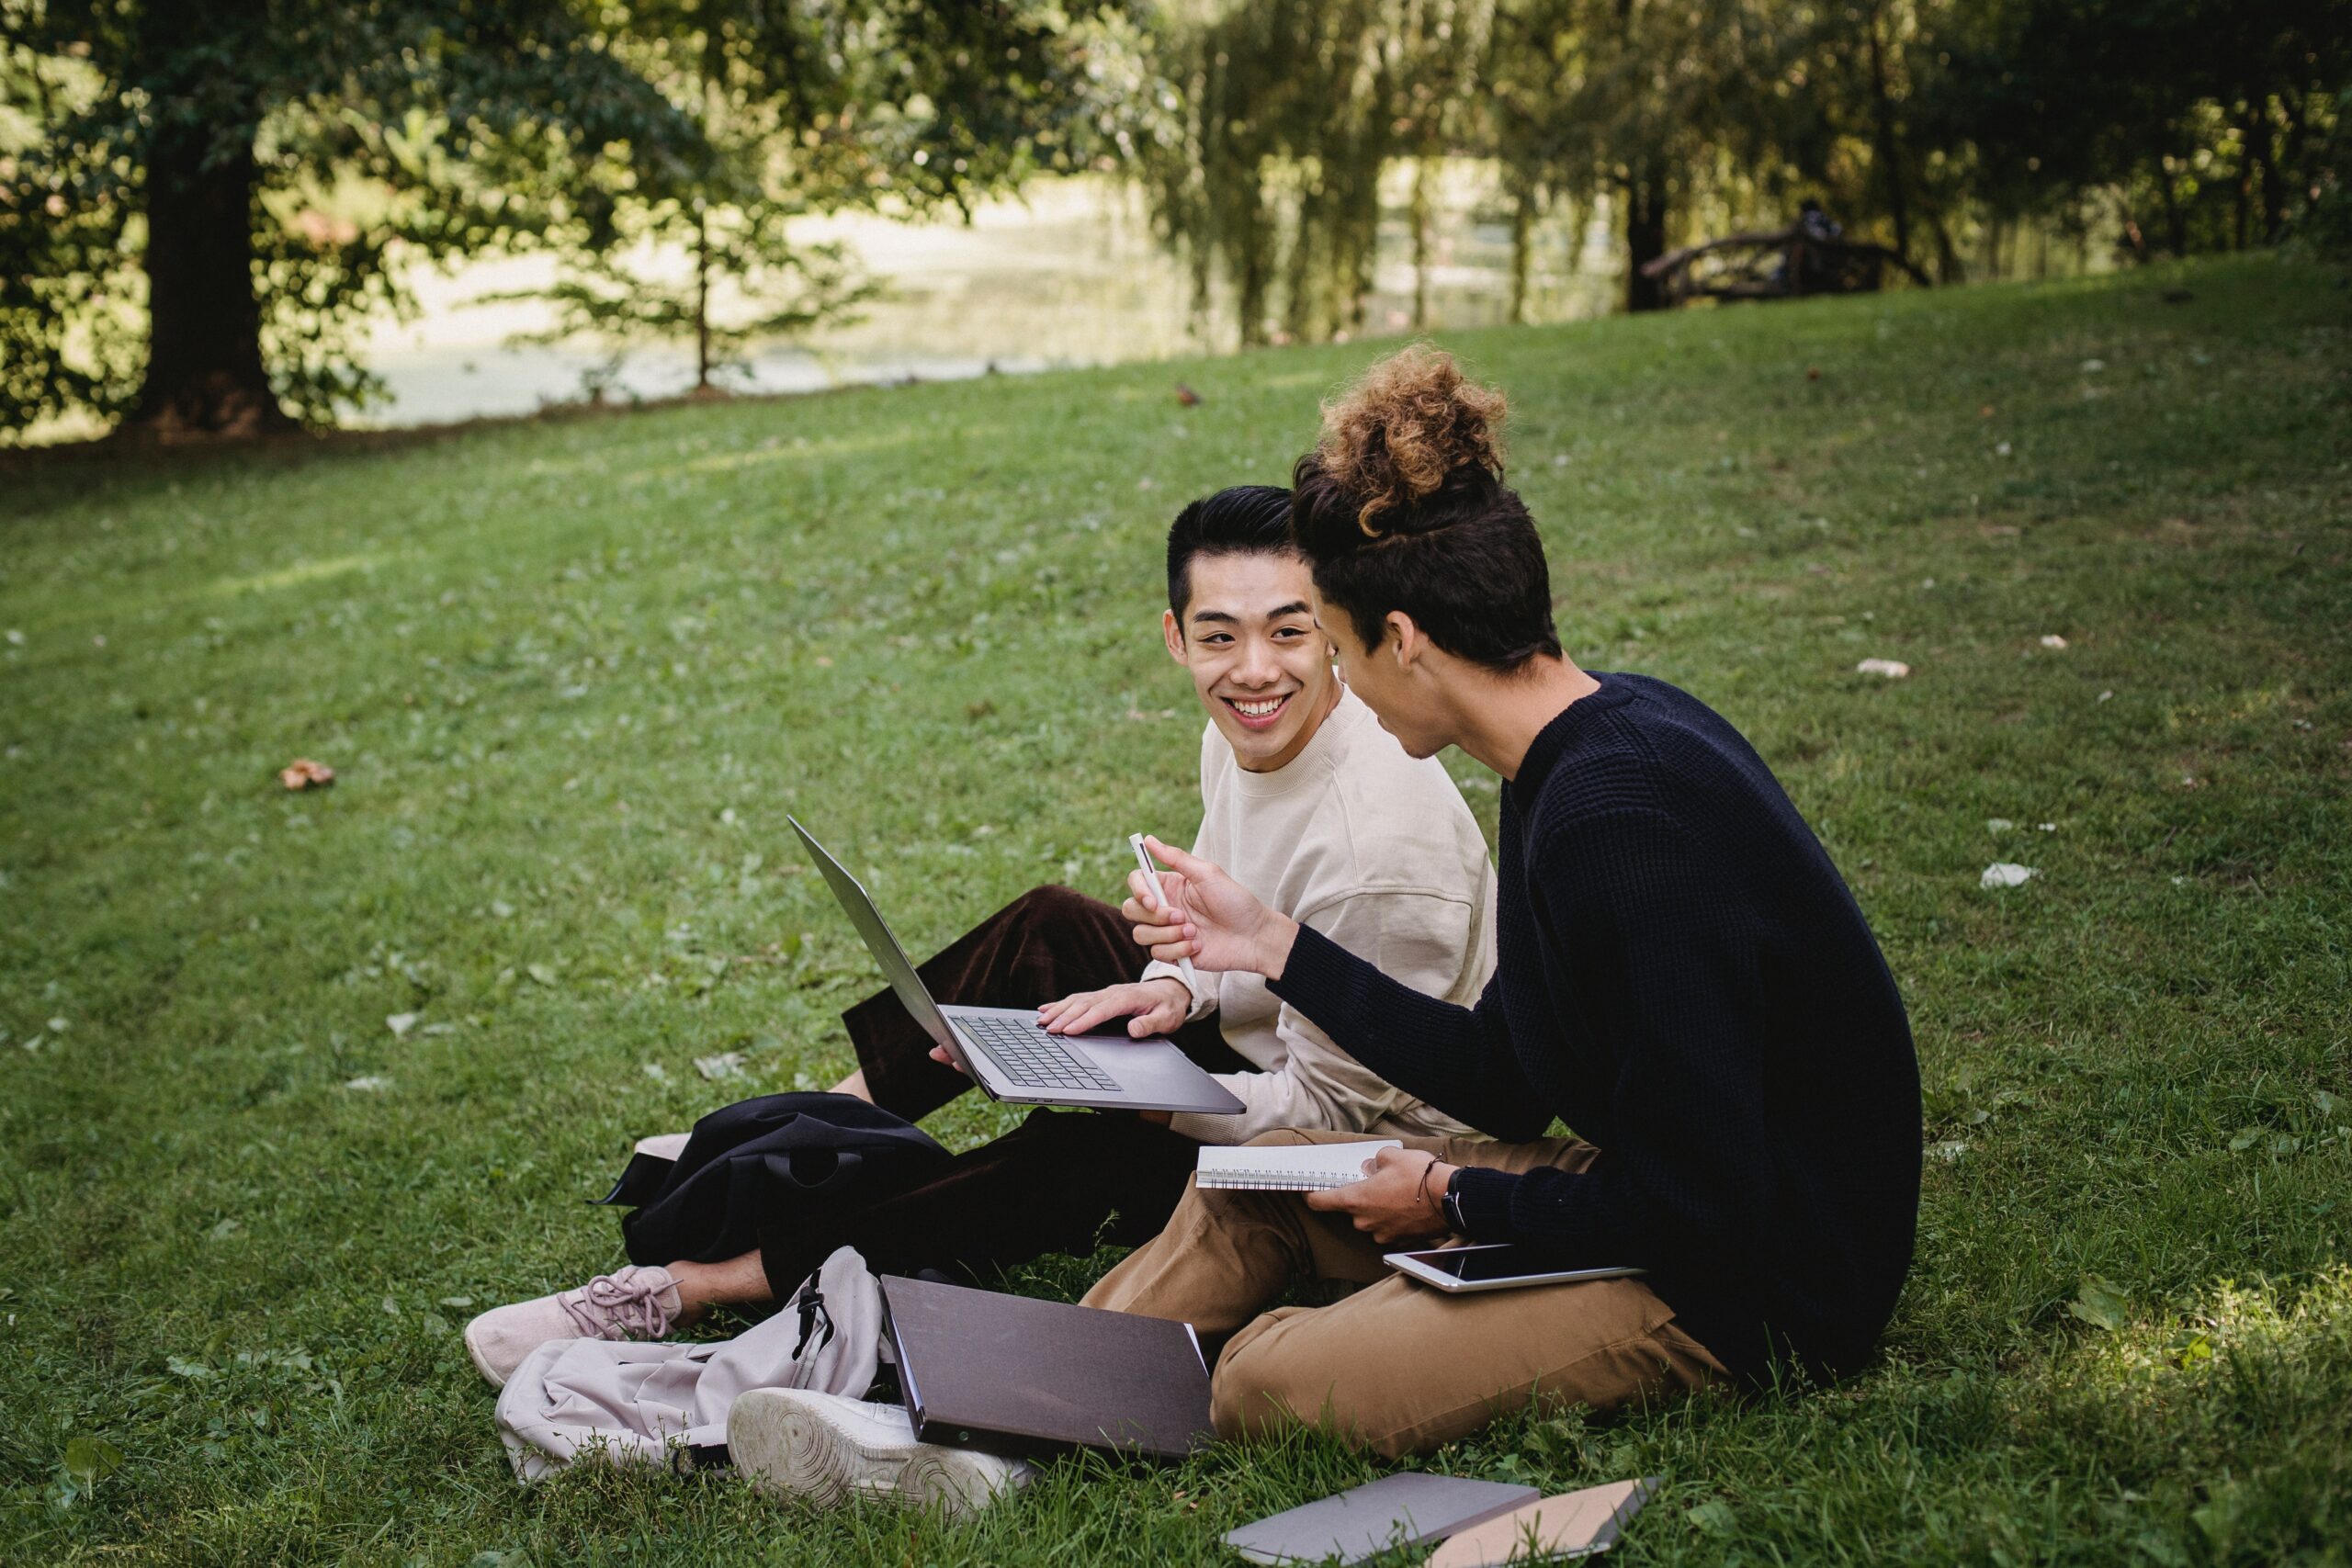 https://thecollegepost.com/wp-content/uploads/2022/11/Two-students-with-gadgets-talking-on-the-grass-scaled.jpg